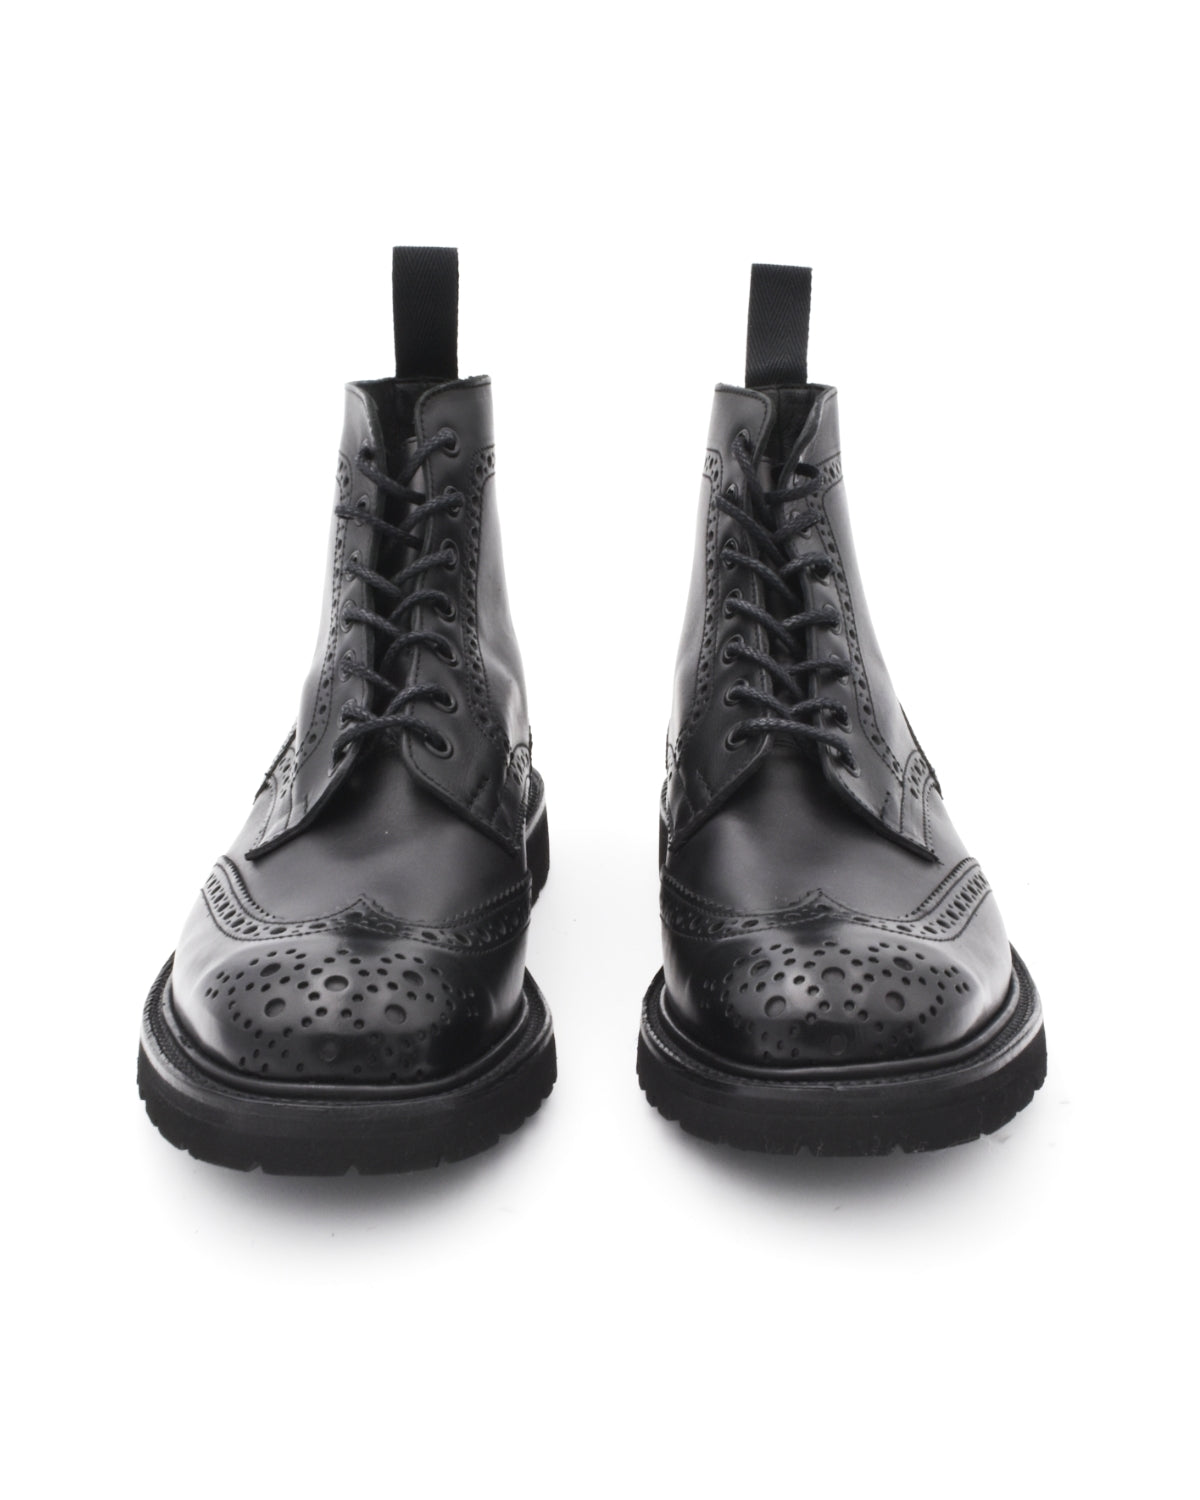 Trickers Black Stow Lace-Up Boot on Vi-Lite Vibram Sole